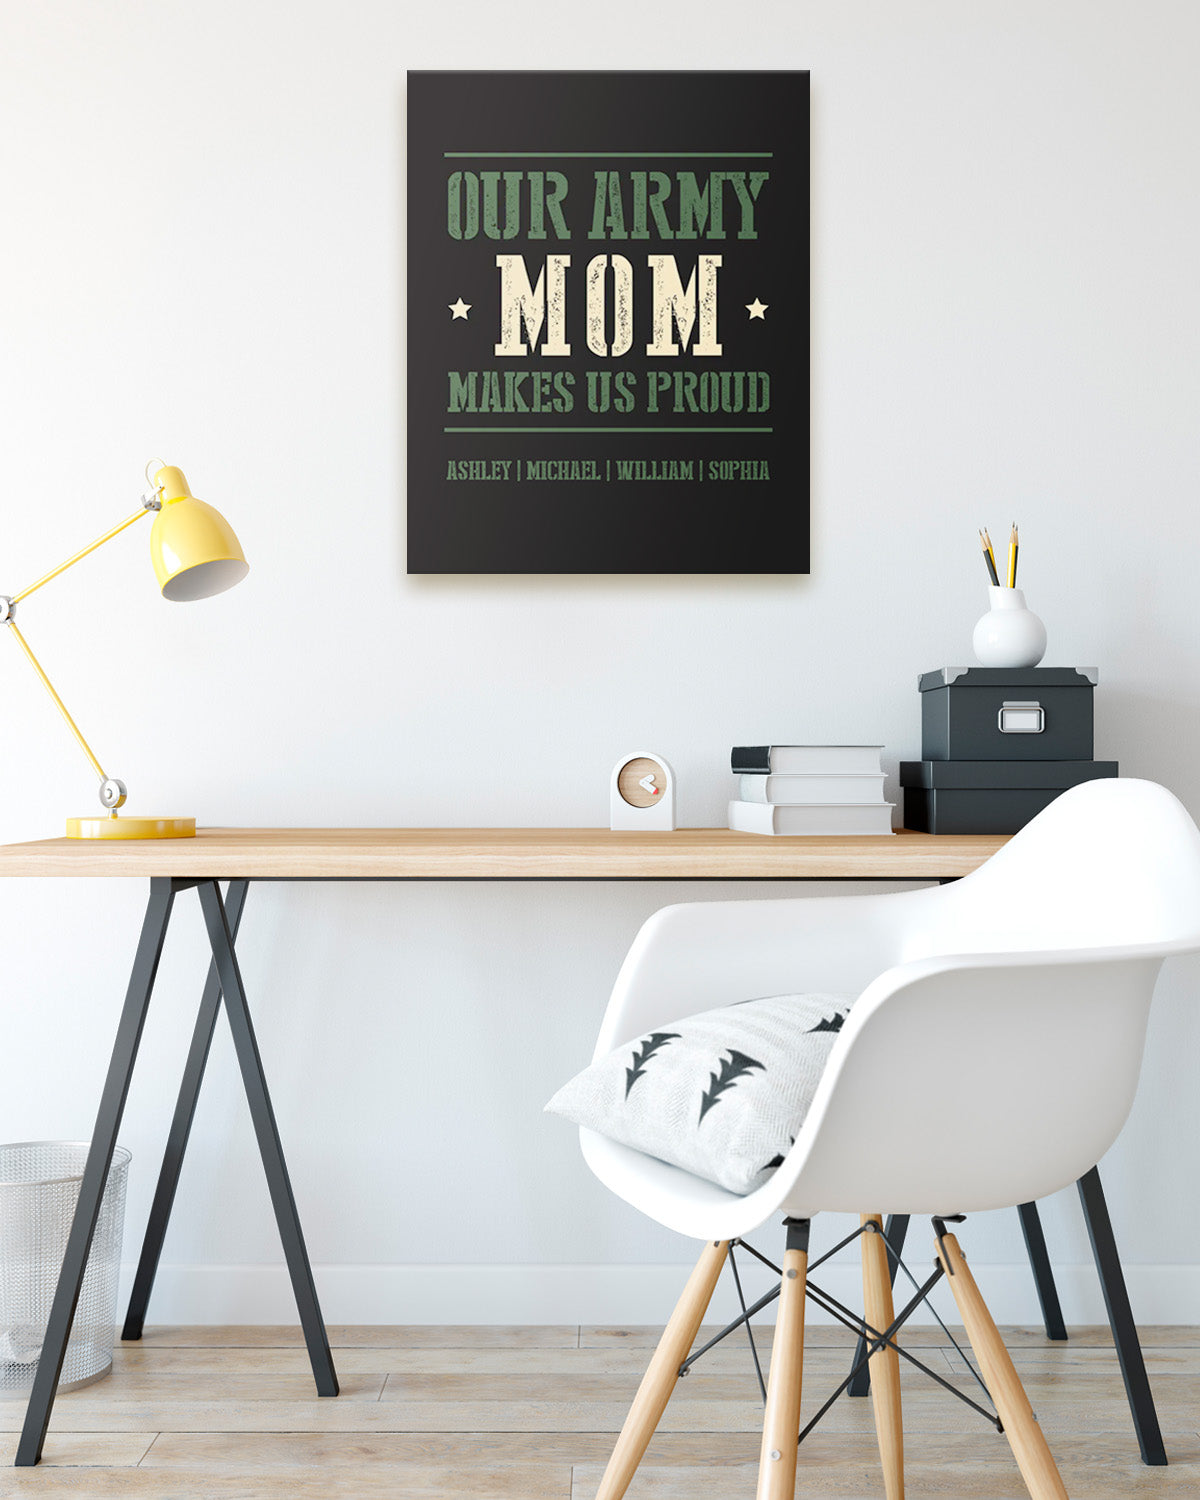 Our Army Mom Makes Us Proud - Customizable Wall Décor Canvas Art - Gift for Mom From Children